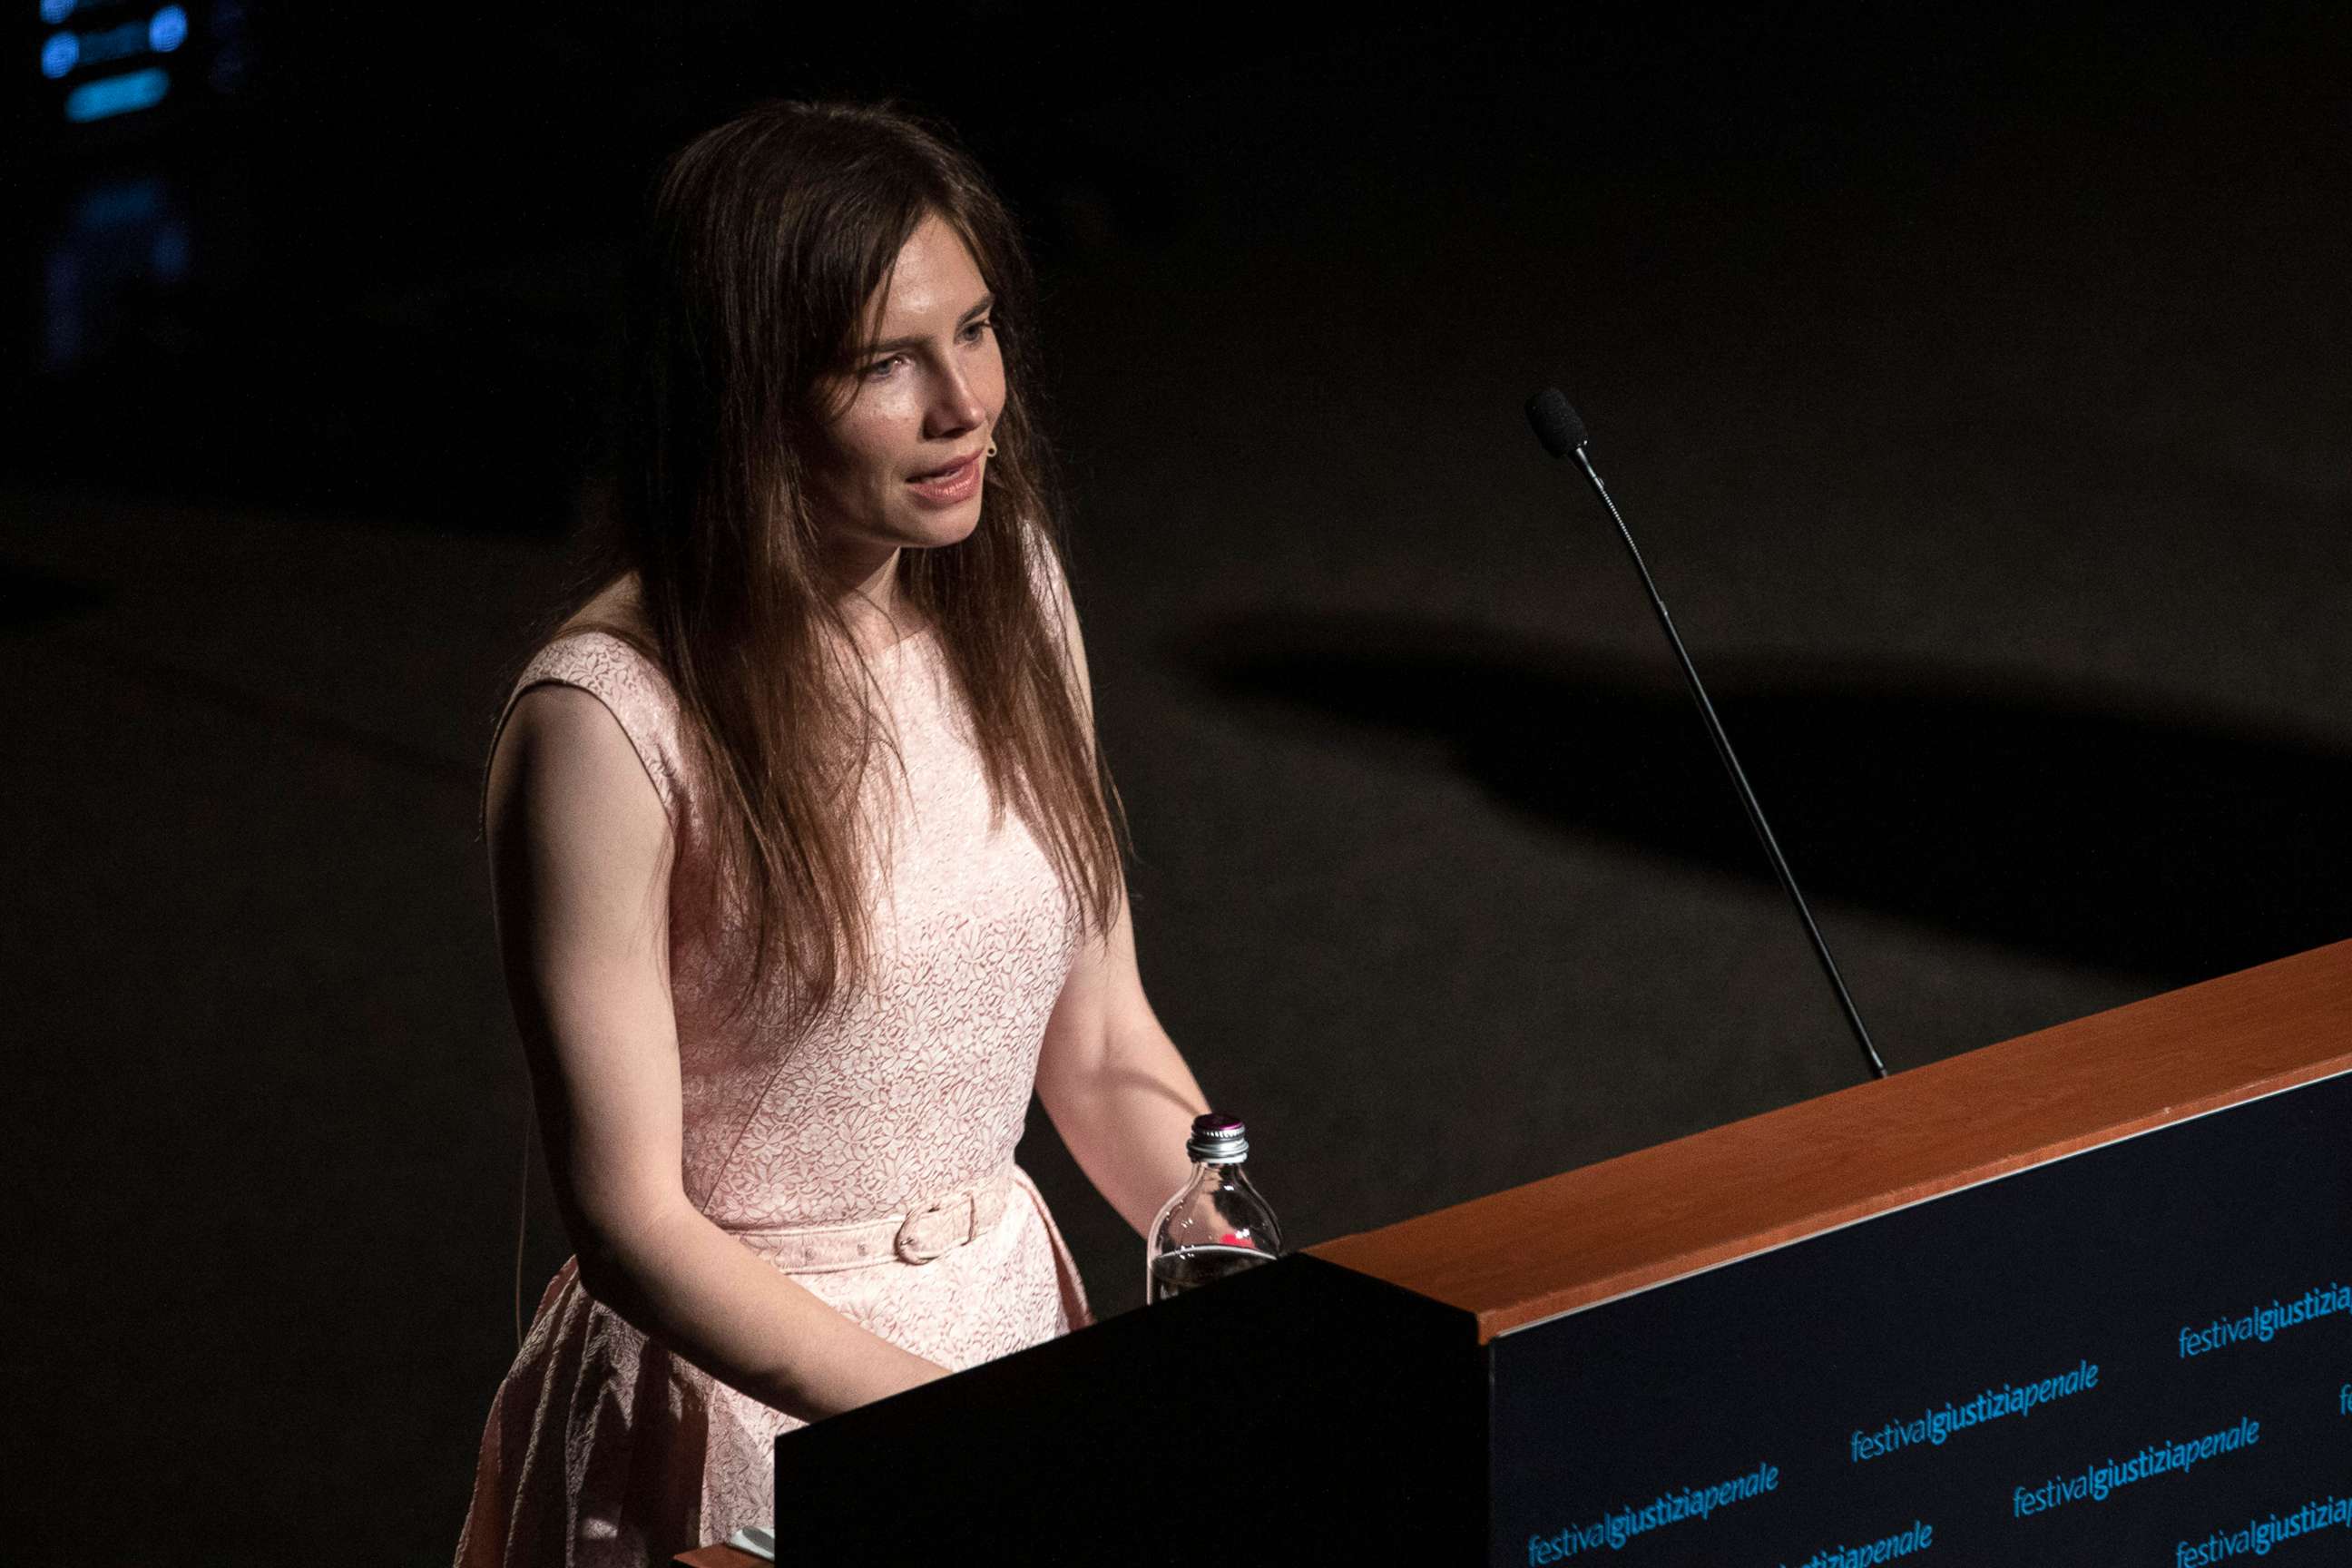 PHOTO: American journalist Amanda Knox delivers a speech during a panel session on June 15, 2019 in Modena, Italy.